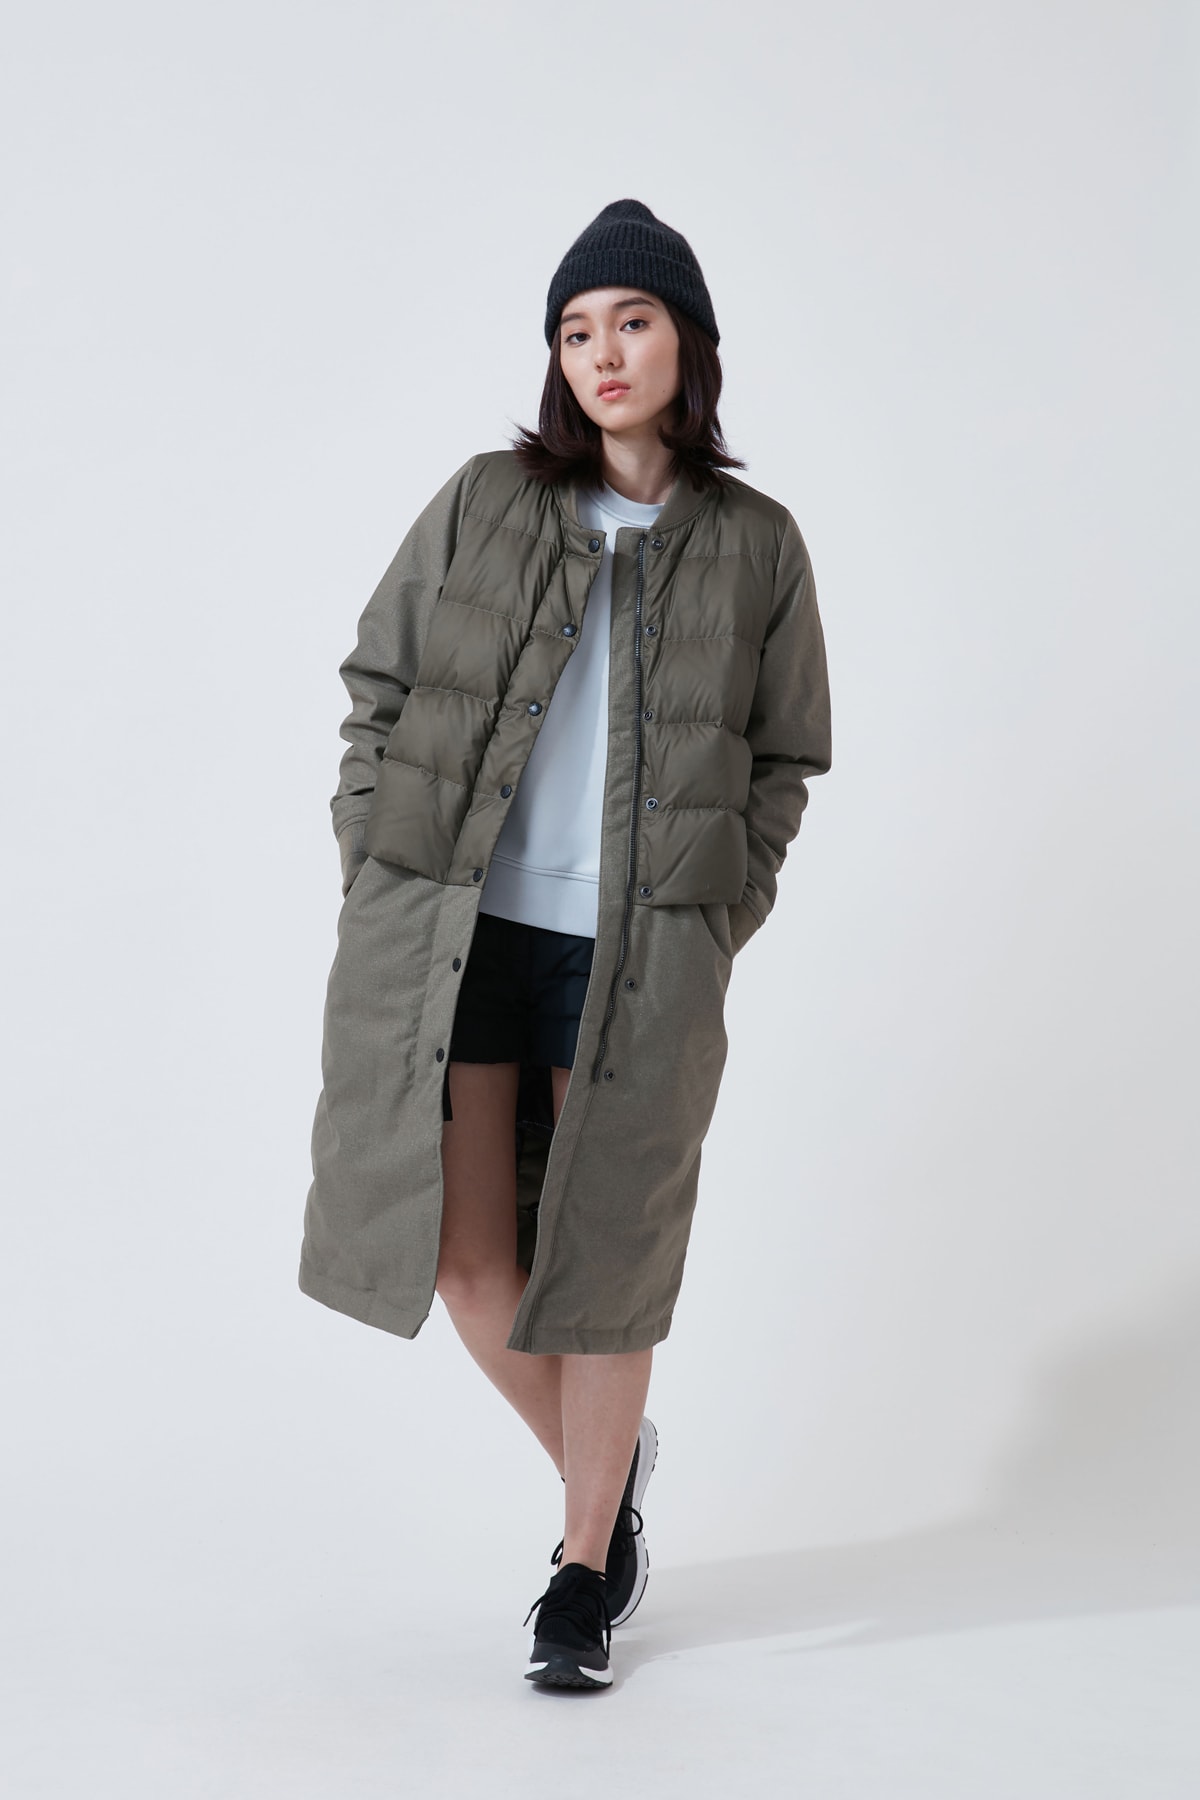 The North Face Urban Exploration Black Series Fall Winter 2018 Jacket Green Top White Skirt Black